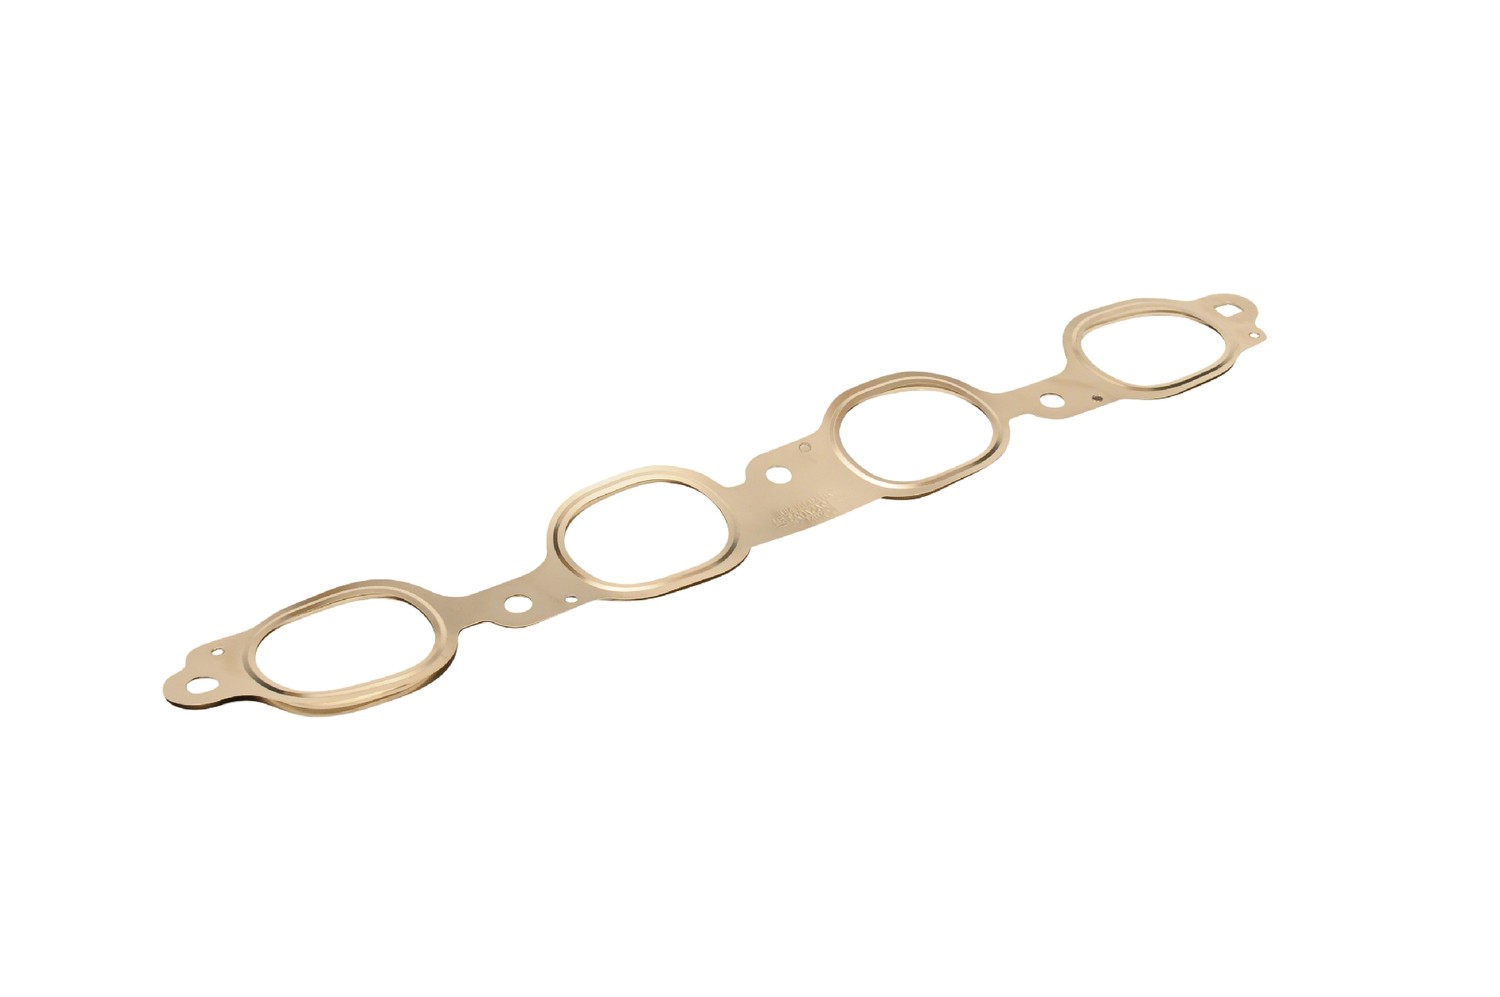 GM GENUINE PARTS - Exhaust Manifold Gasket - GMP 12657093